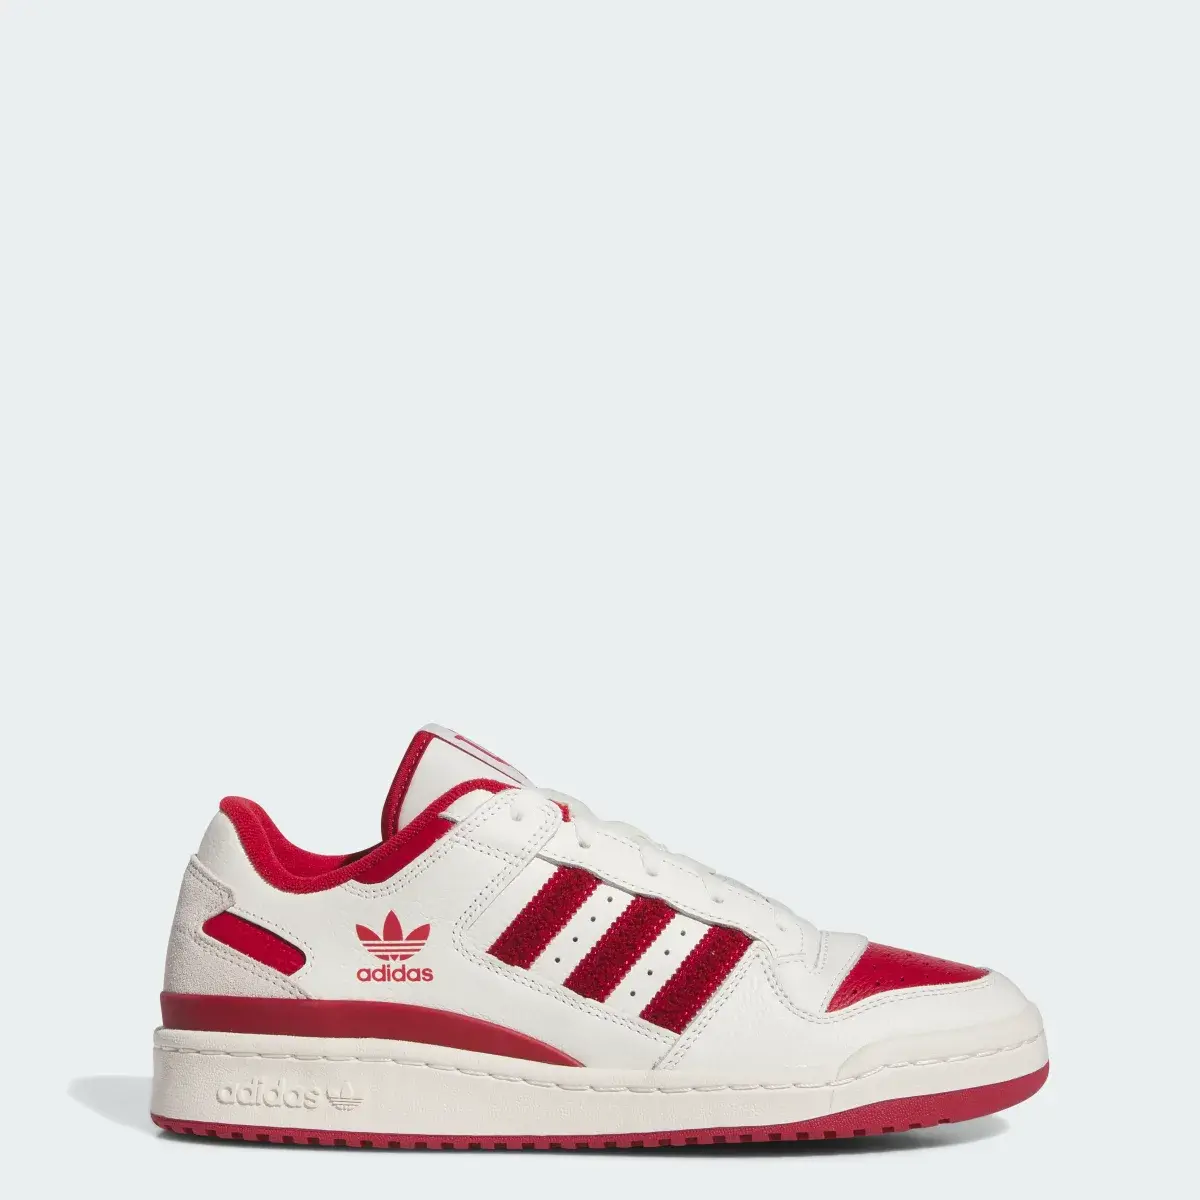 Adidas Indiana Forum Low Shoes. 1